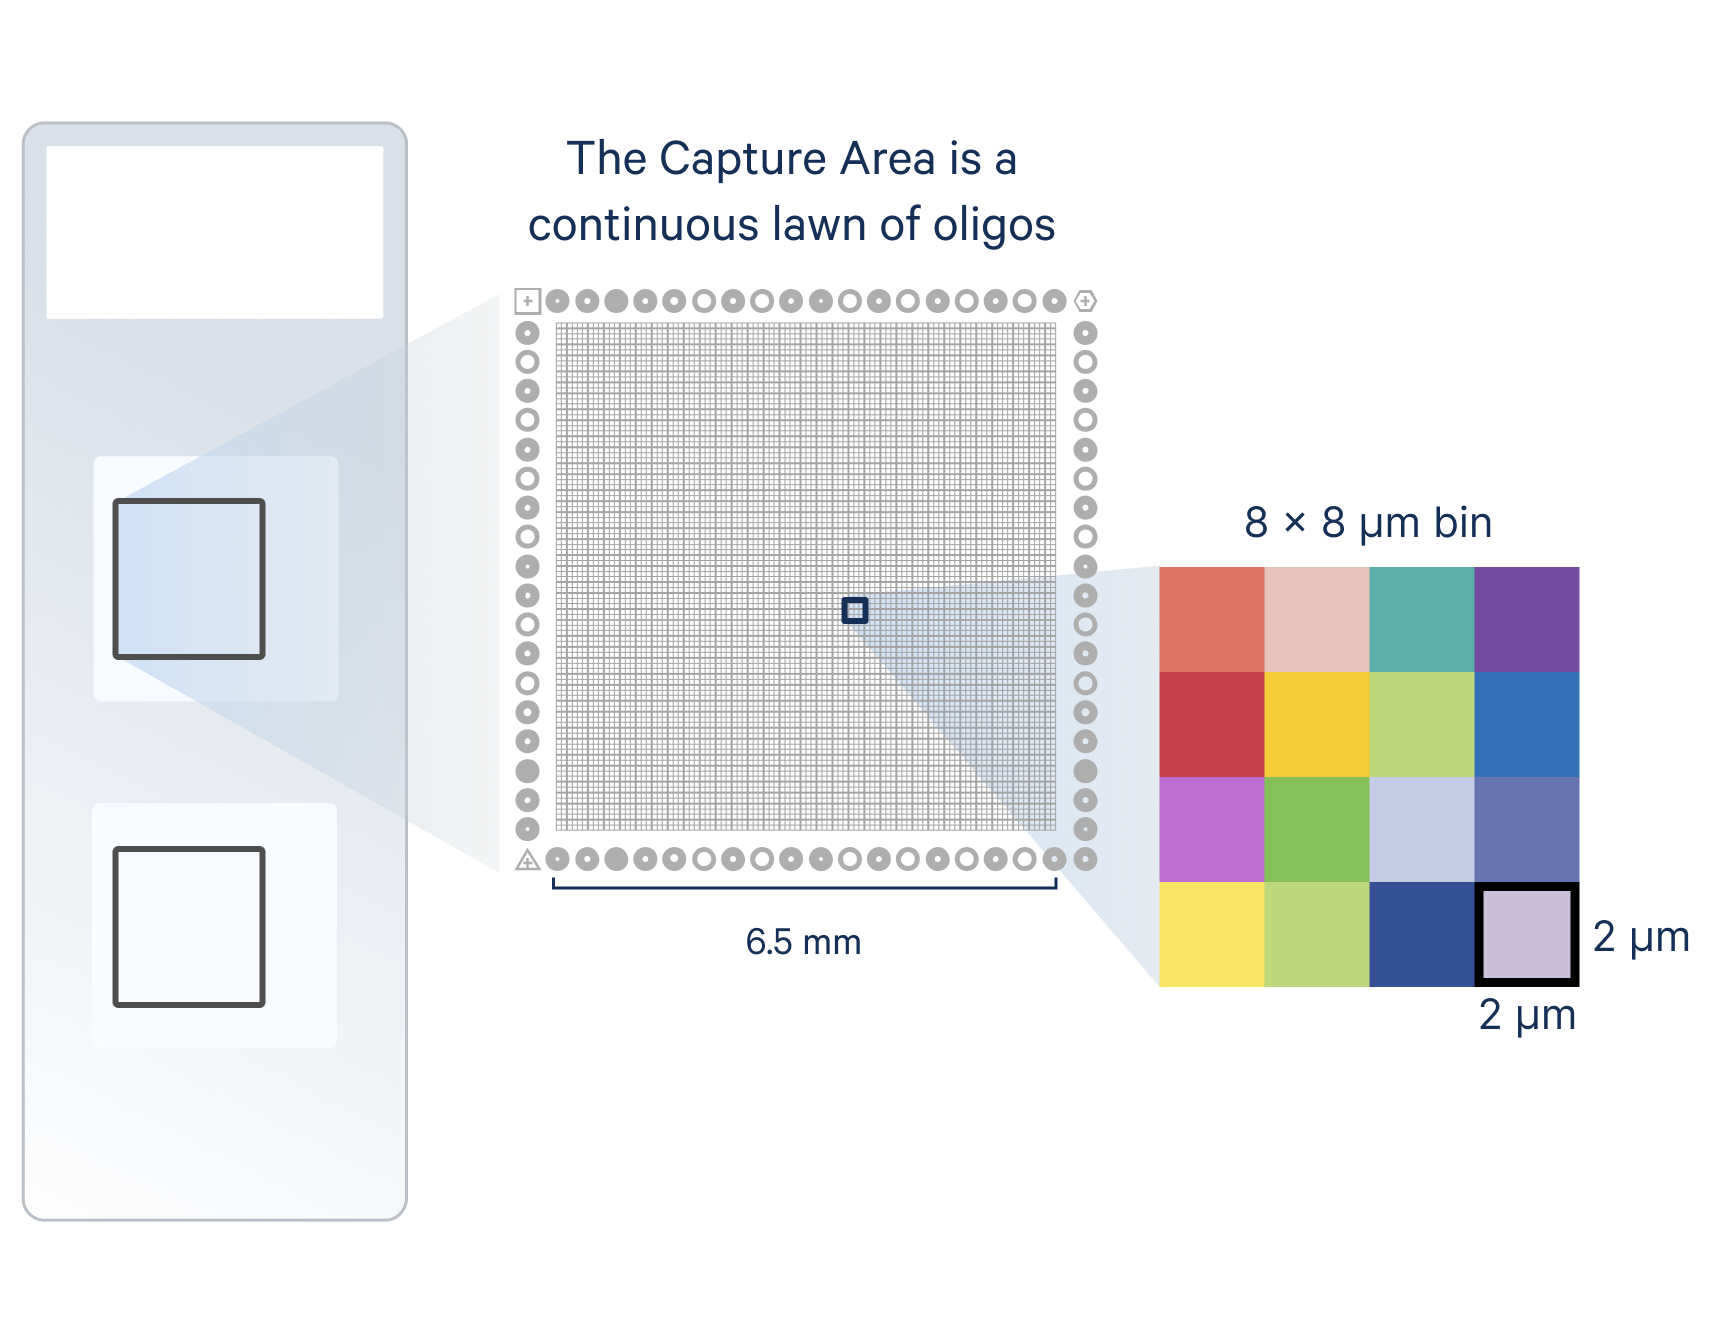 Figure 1A. Visium HD Capture Area architecture. A schematic showing the layout of a Visium HD slide, with two 6.5 x 6.5 mm Visium HD Capture Areas comprised of a continuous capture oligonucleotide “lawn” subdivided into 2 x 2 µm squares.